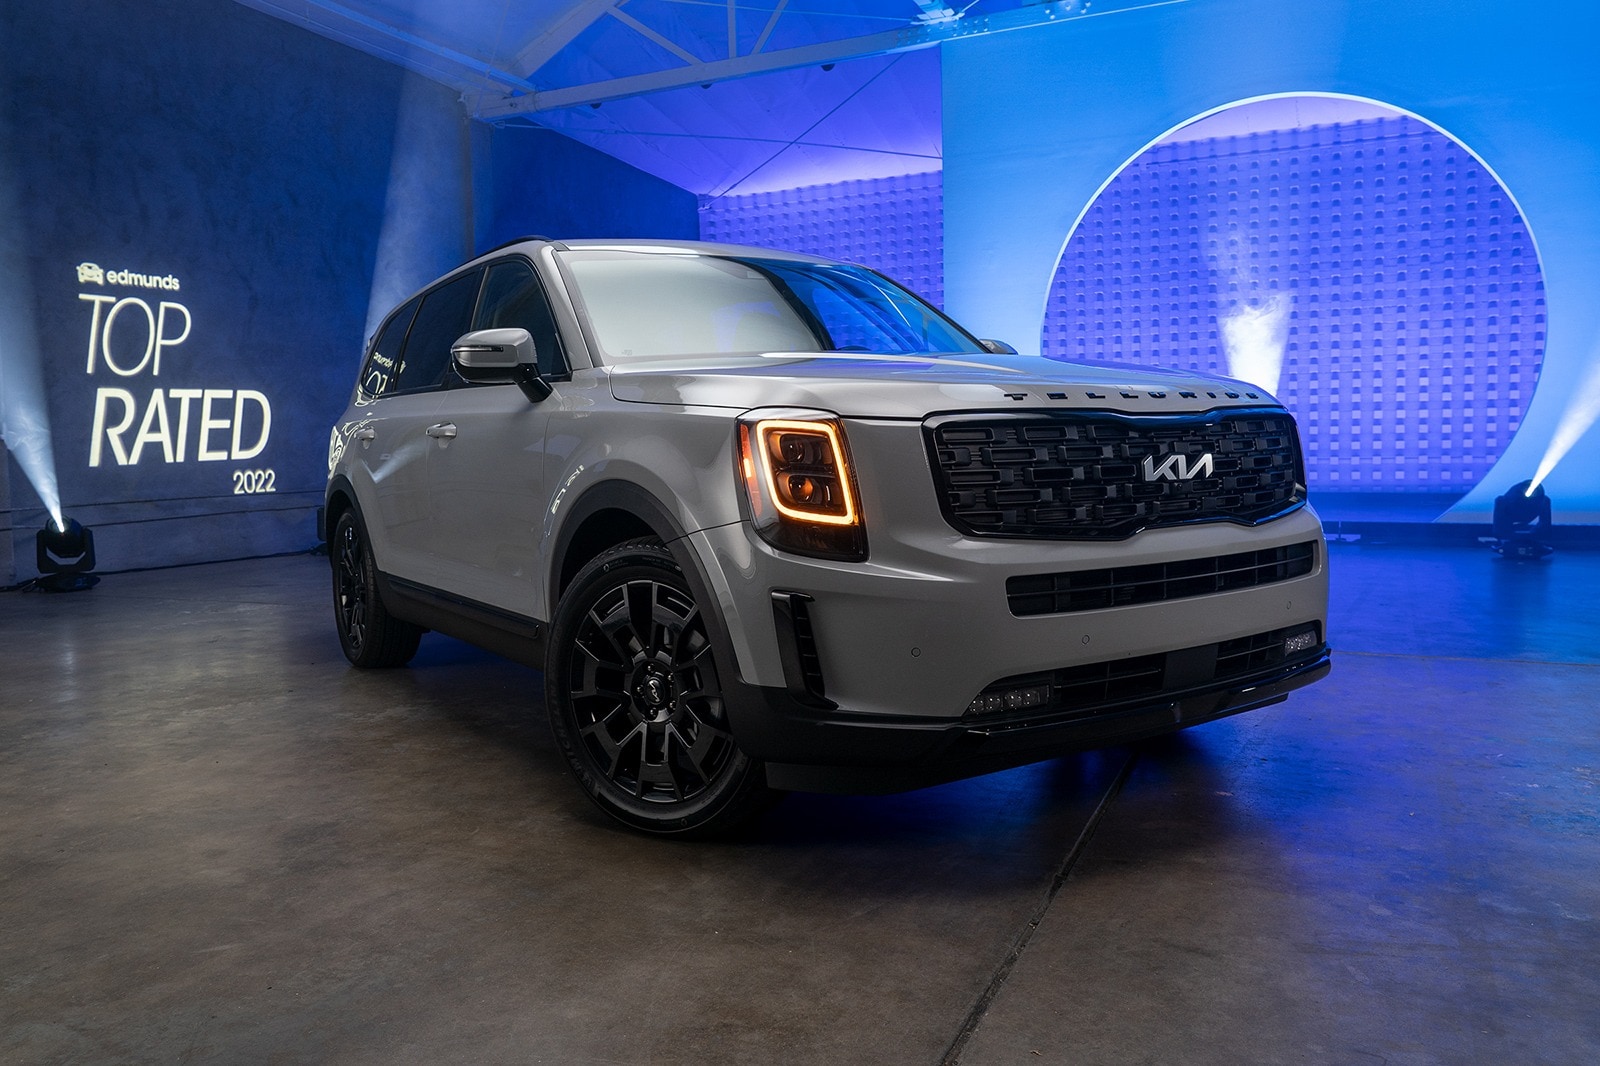 Kia Telluride Is the Edmunds Top Rated SUV for the Third Year in a Row